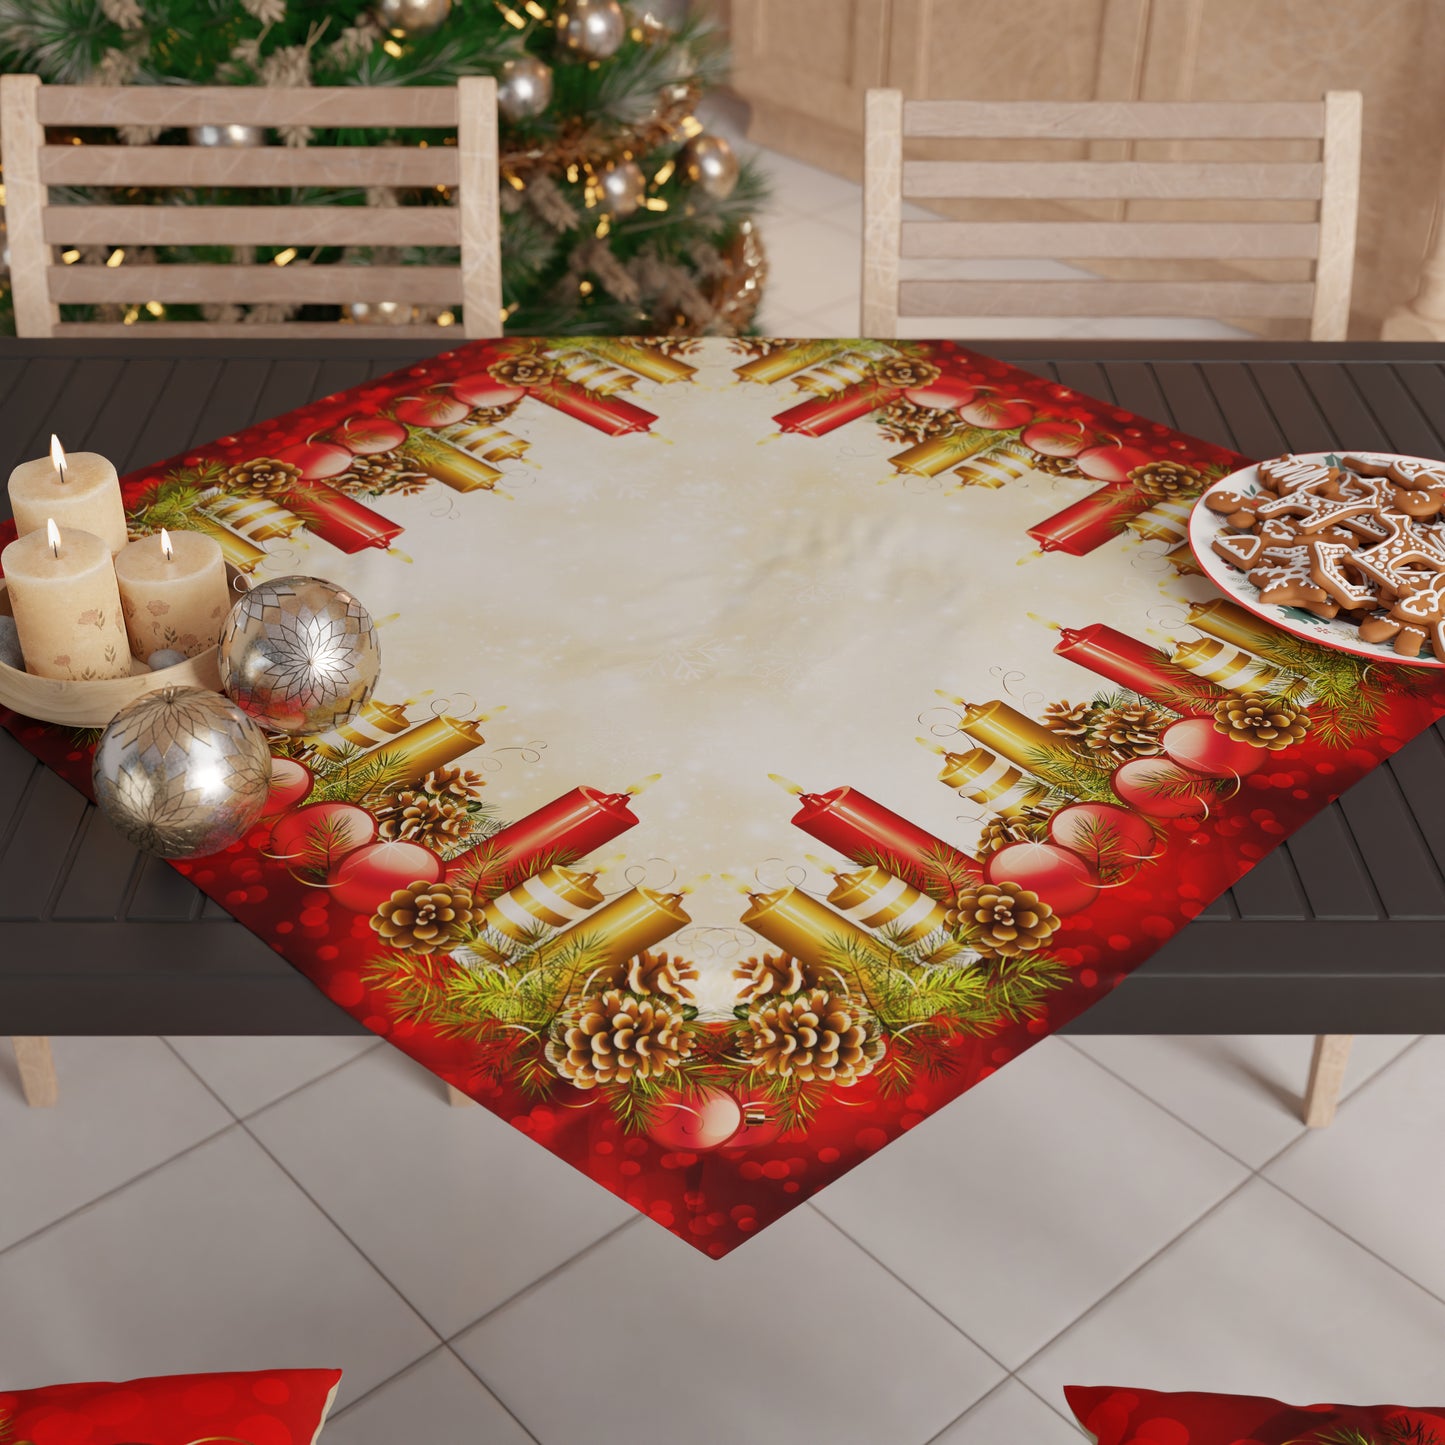 Christmas Centerpiece for Kitchen in Digital Print Candles